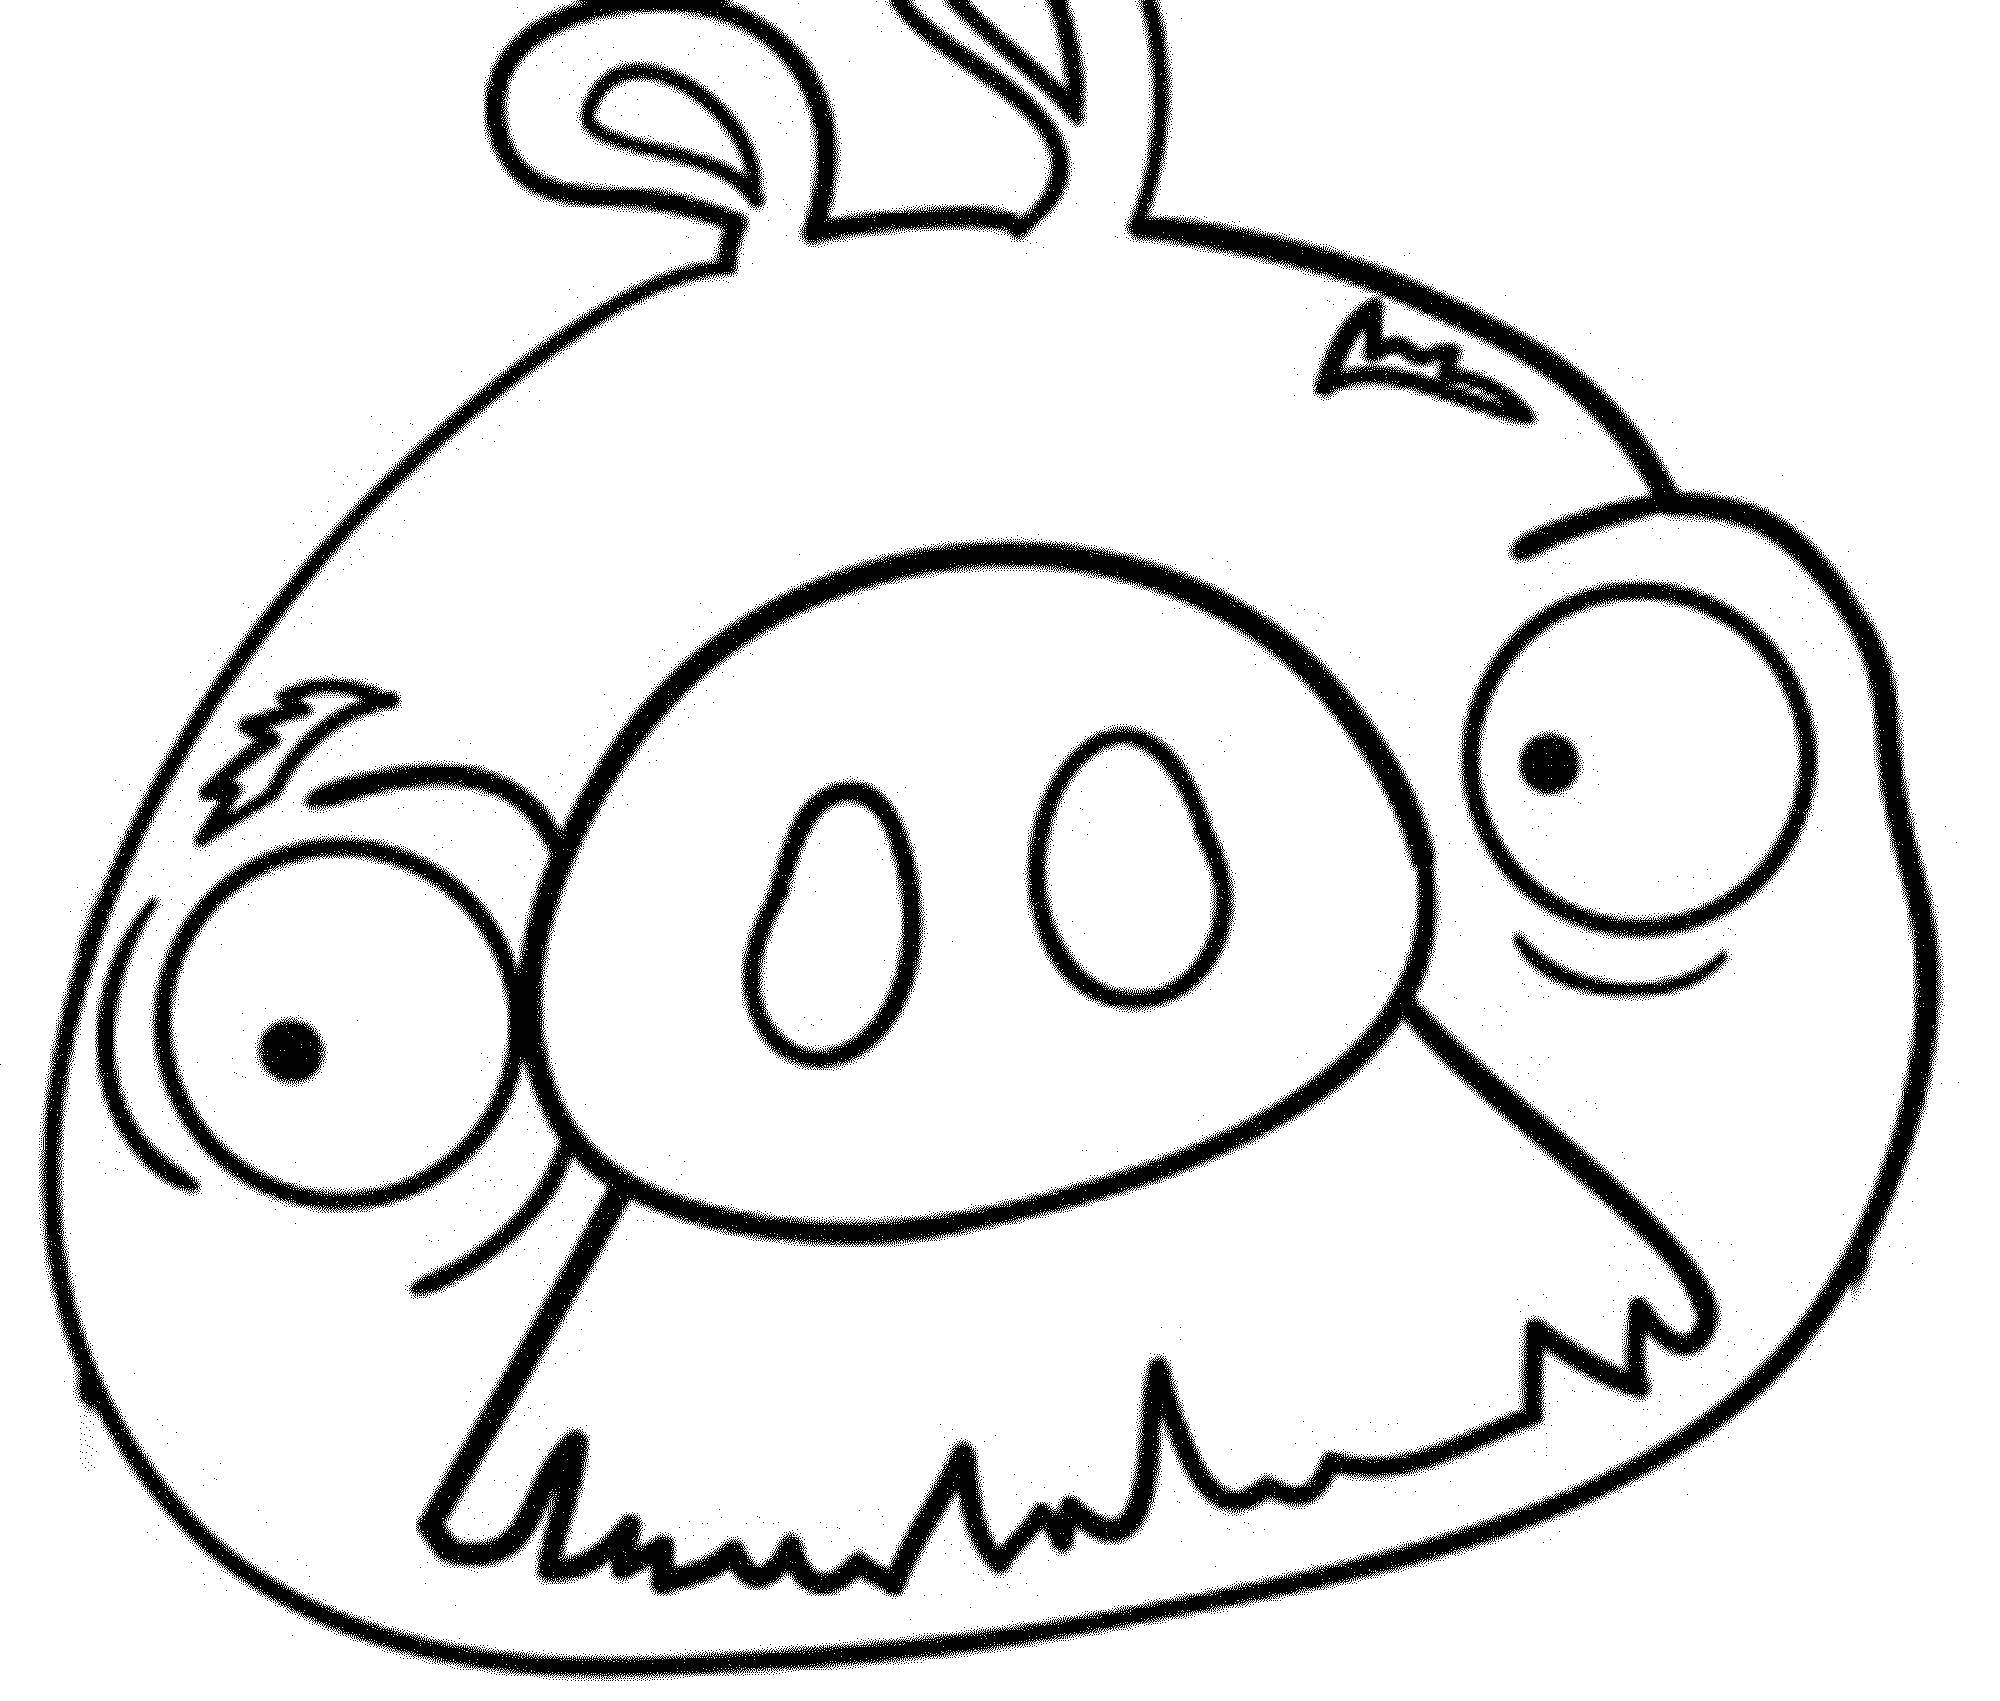 Coloring Pig from angry birds. Category angry birds. Tags:  angry birds pig.